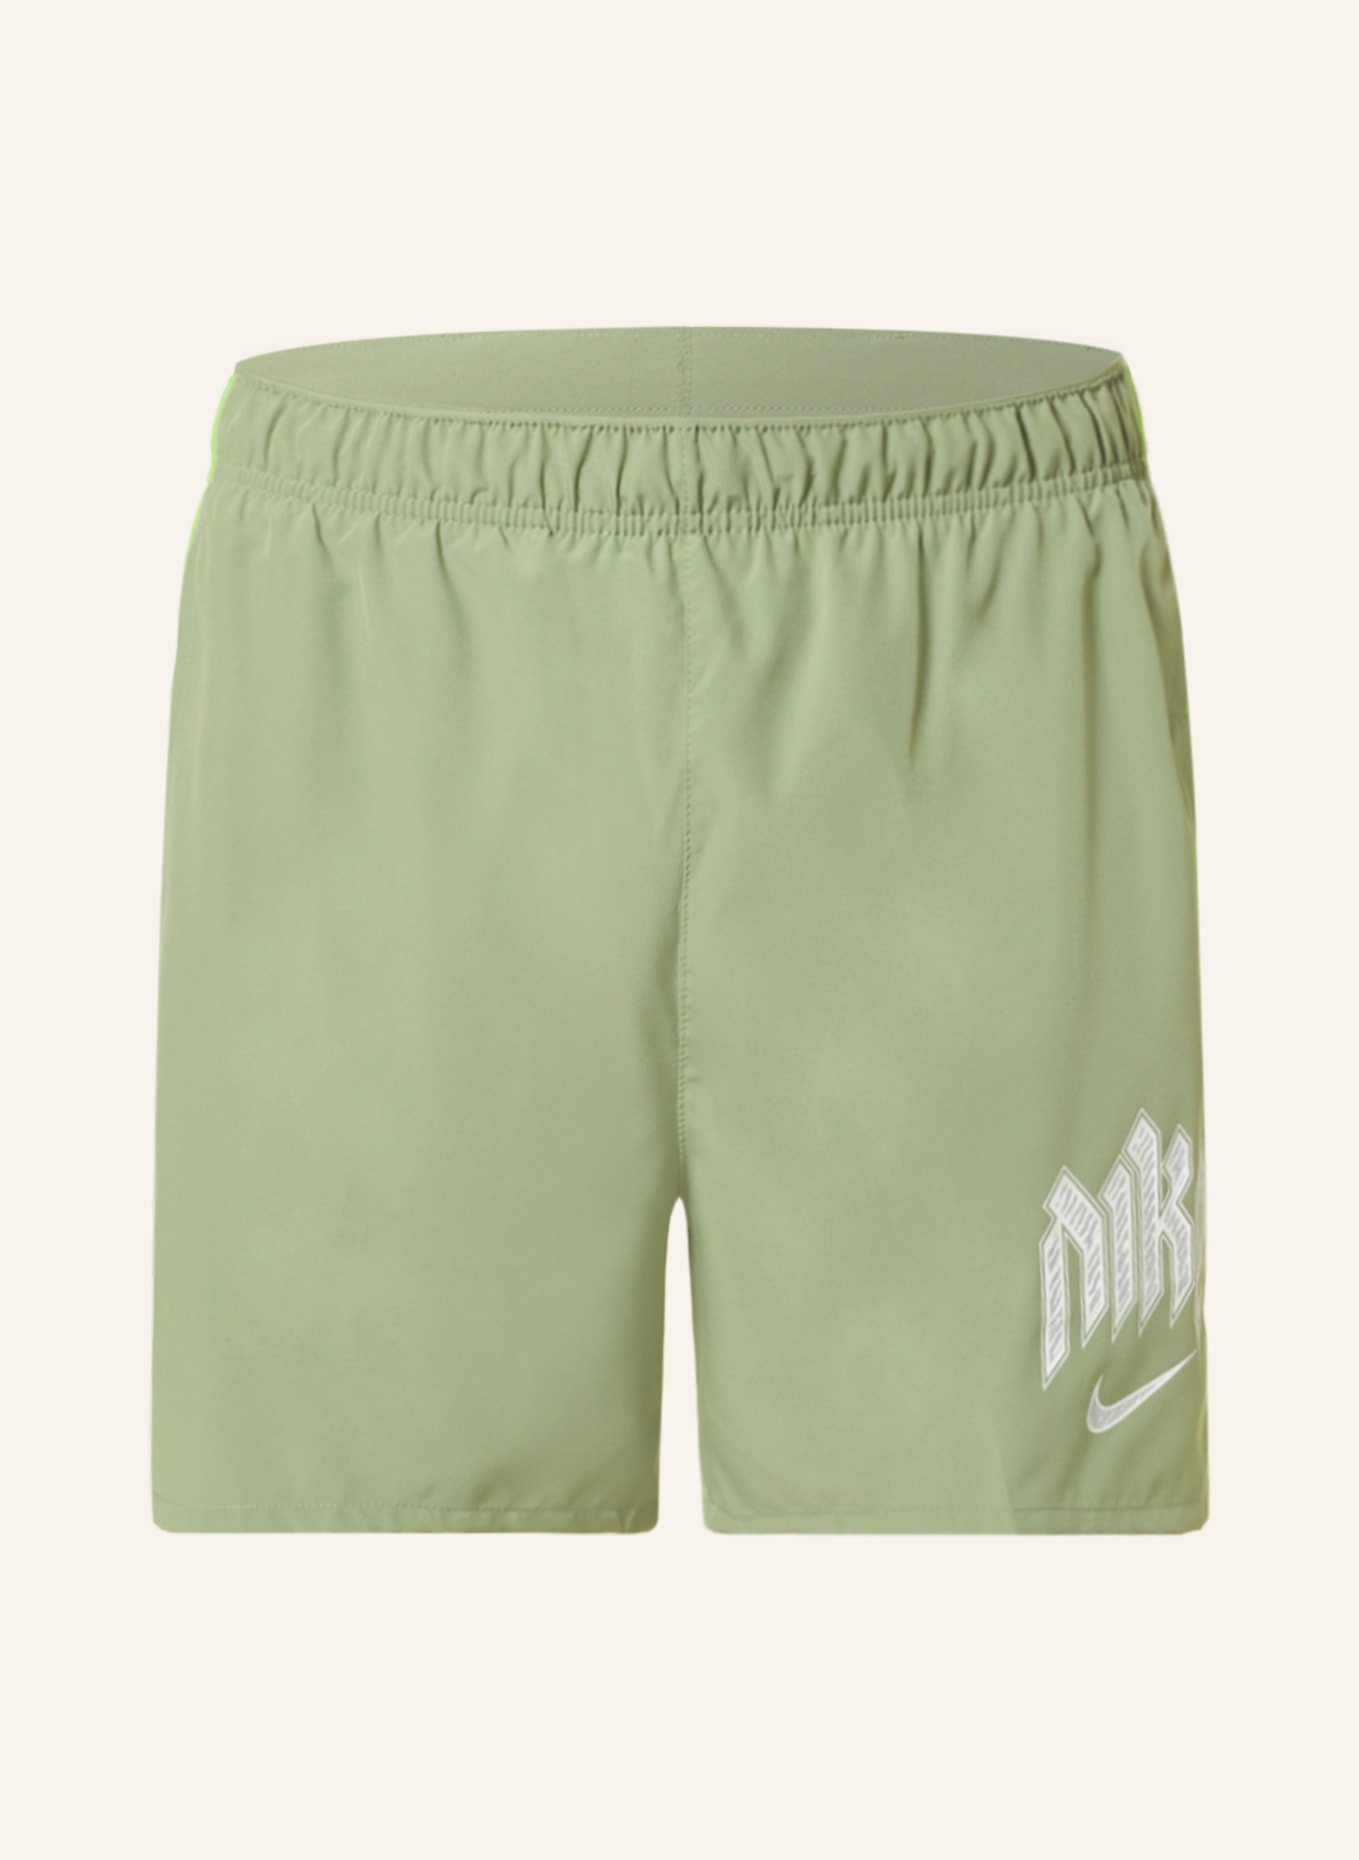 Nike 2-in-1 running shorts DRI-FIT RUN DIVISION CHALLENGE with mesh, Color: OLIVE/ NEON GREEN/ SILVER (Image 1)